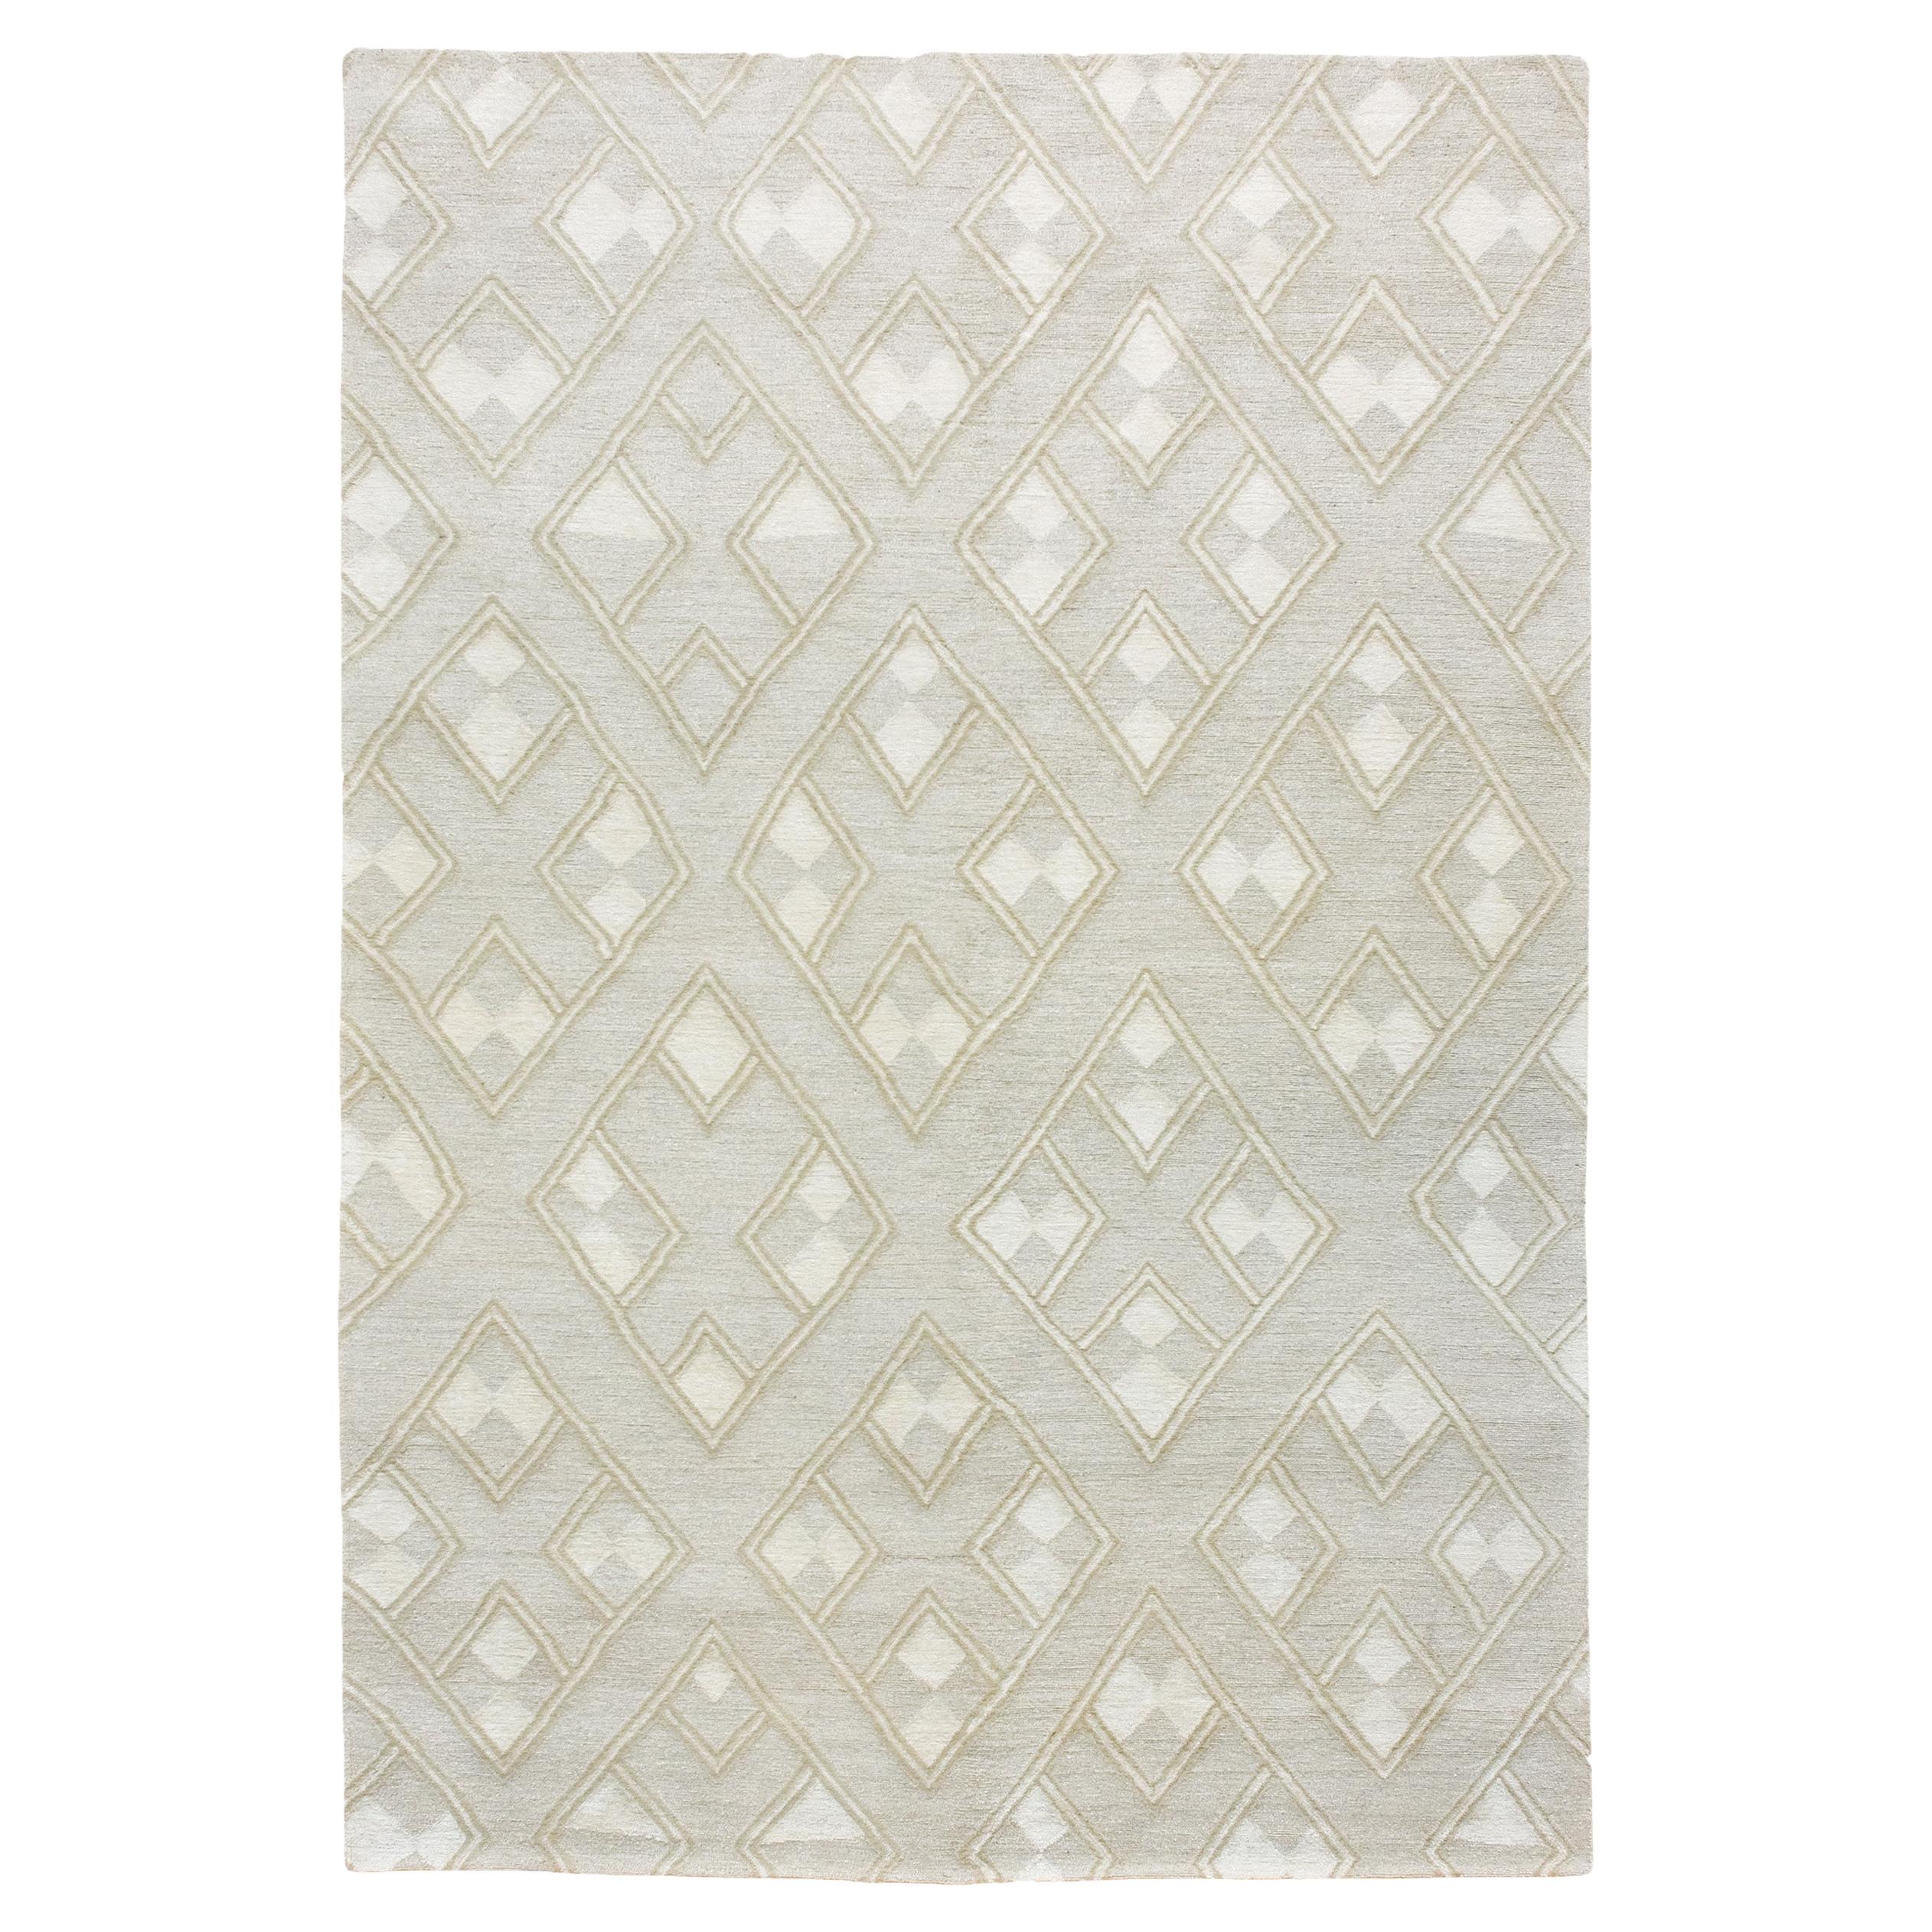 Luxury Modern Hand-Knotted African Igala 12x16 Rug